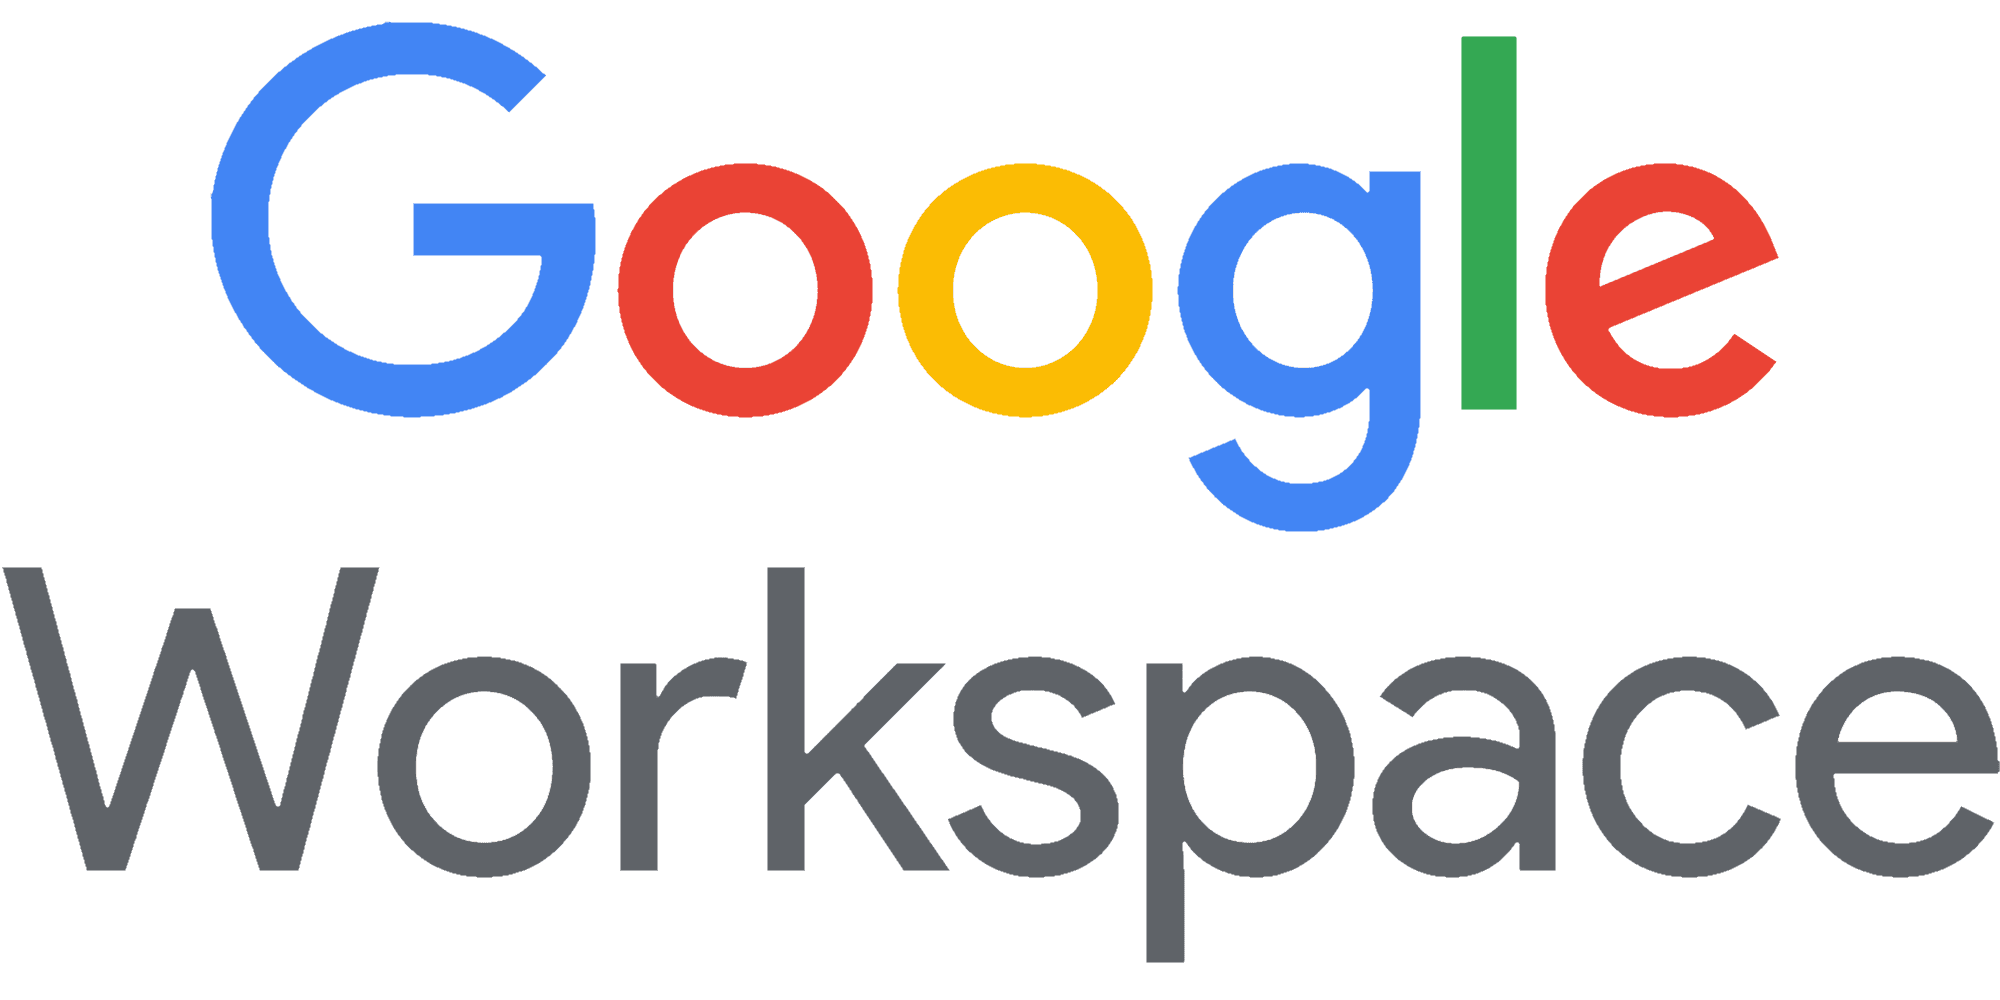 This logo reads "Google Workspace" in the colorful Google font. 